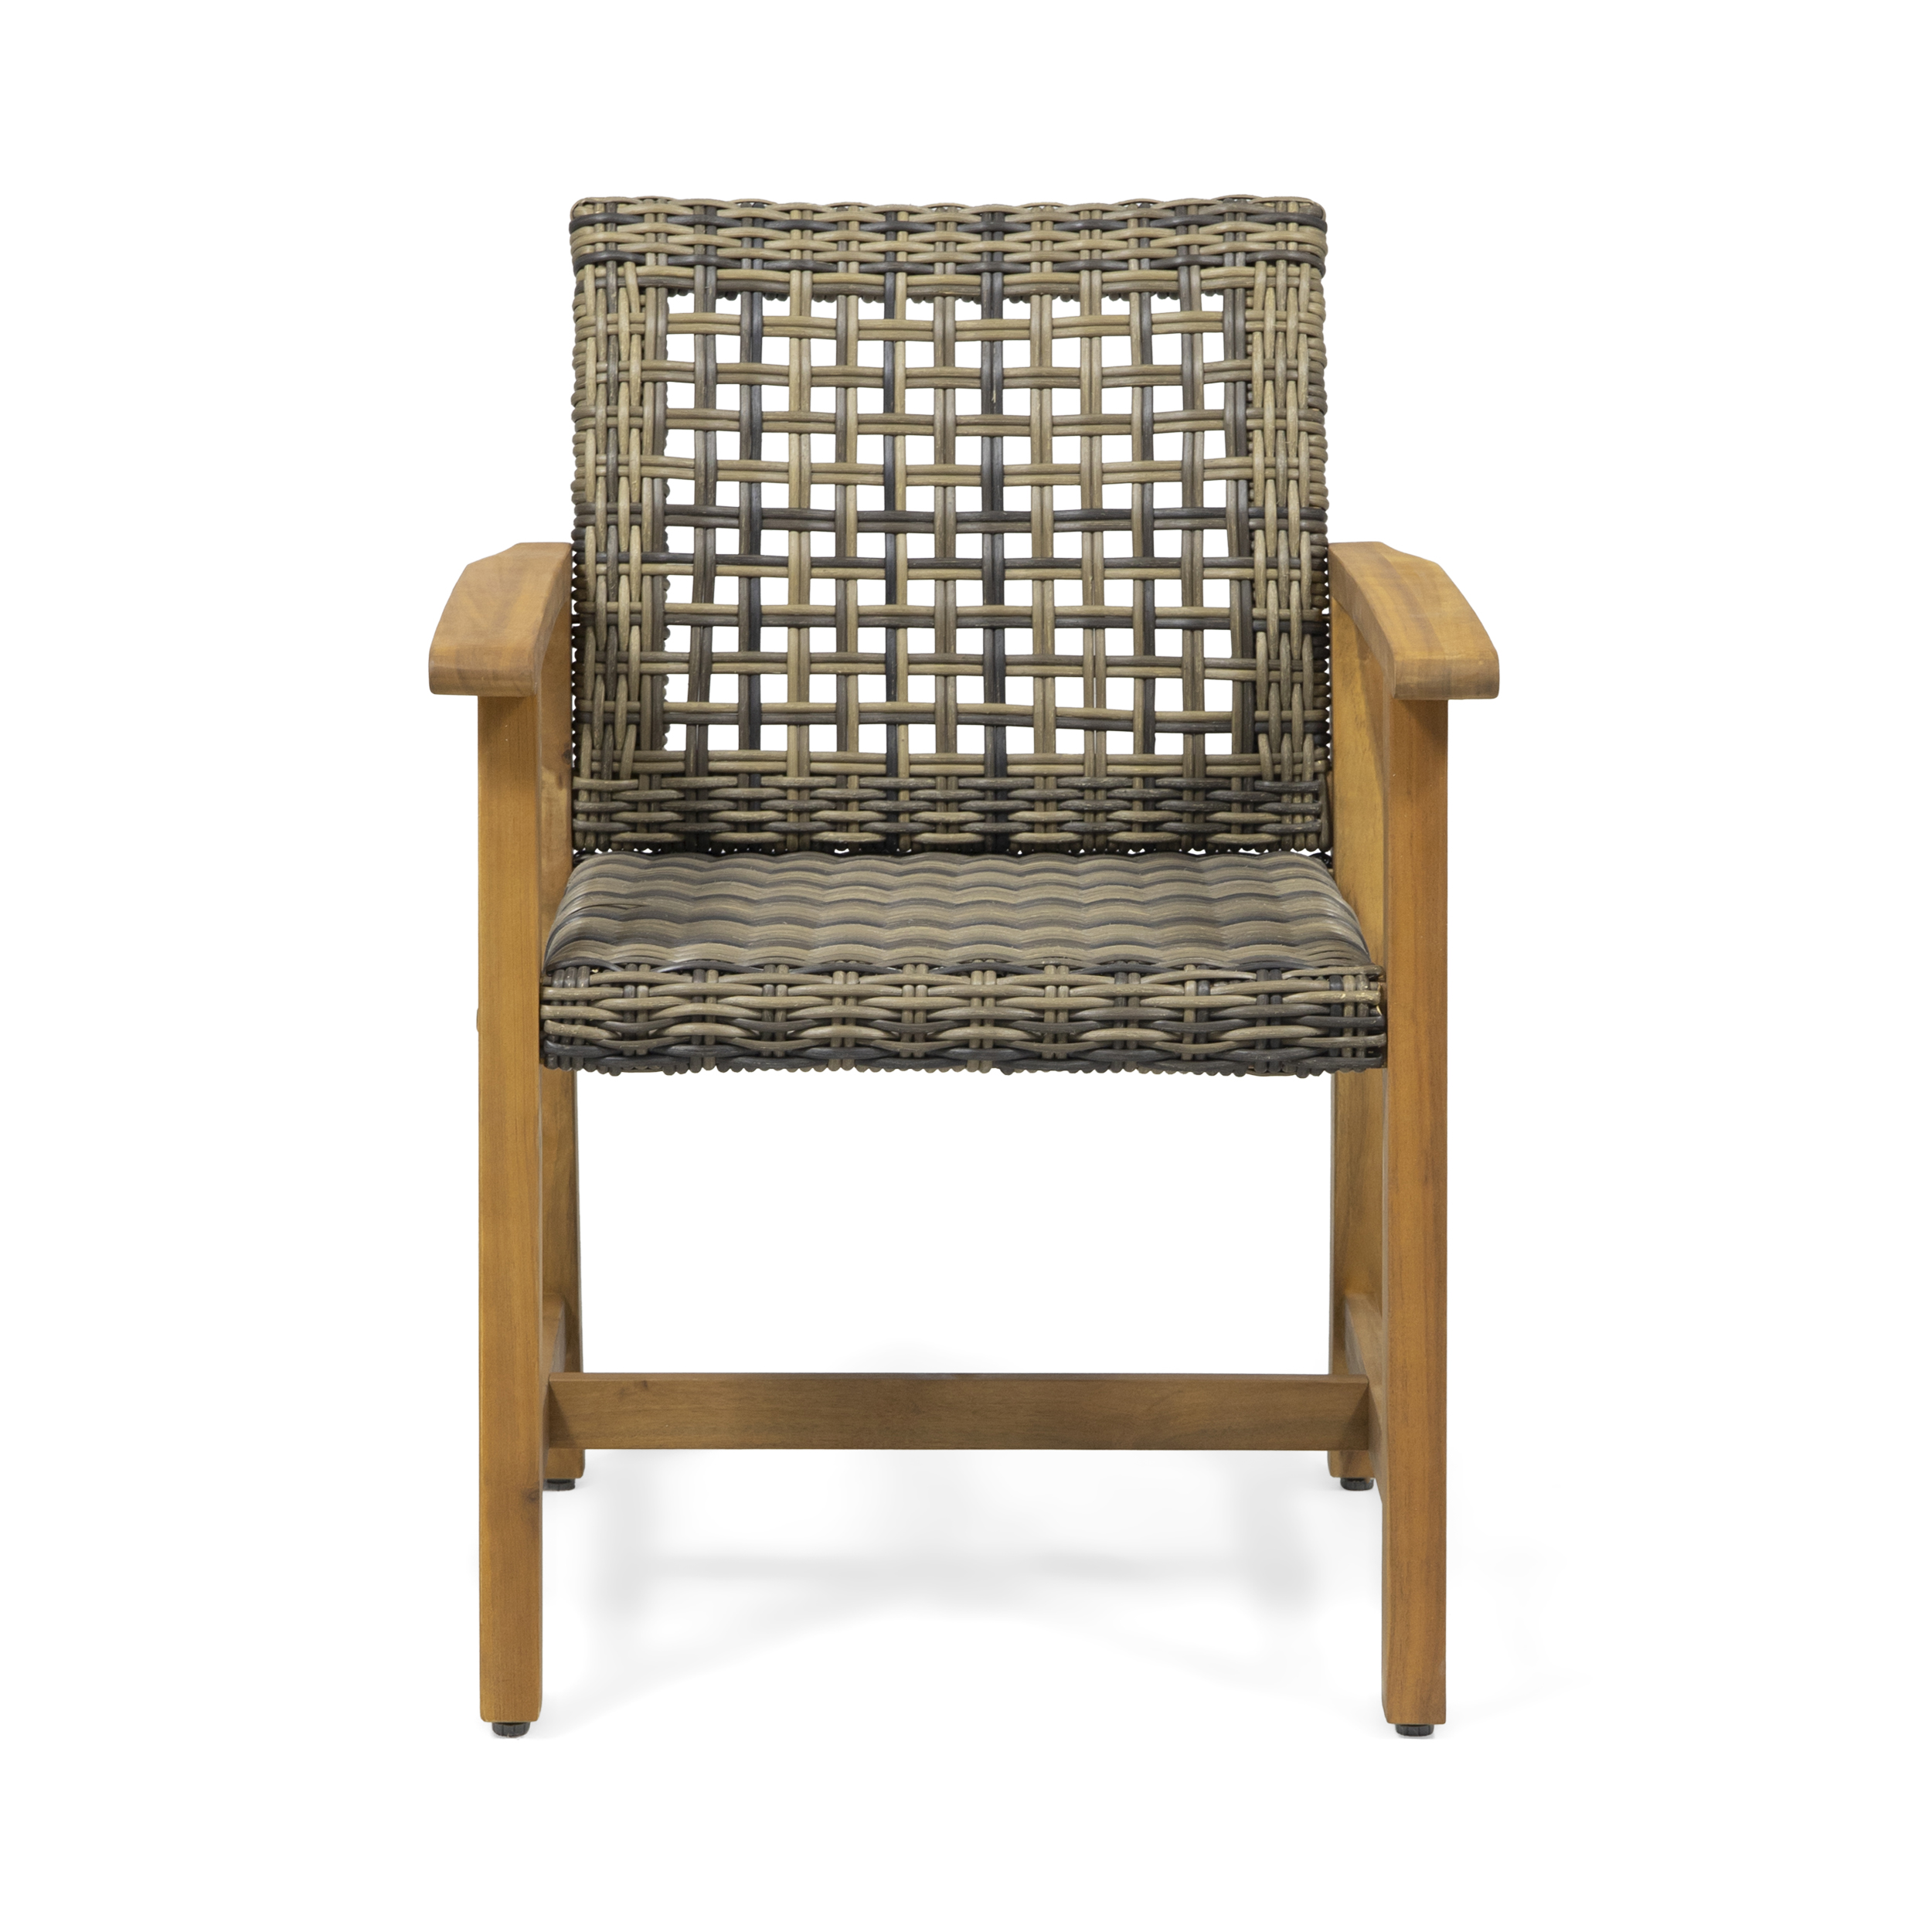 GDF Studio Beacher Outdoor Acacia Wood and Wicker Dining Chair (Set of 2), Natural and Gray - image 3 of 11